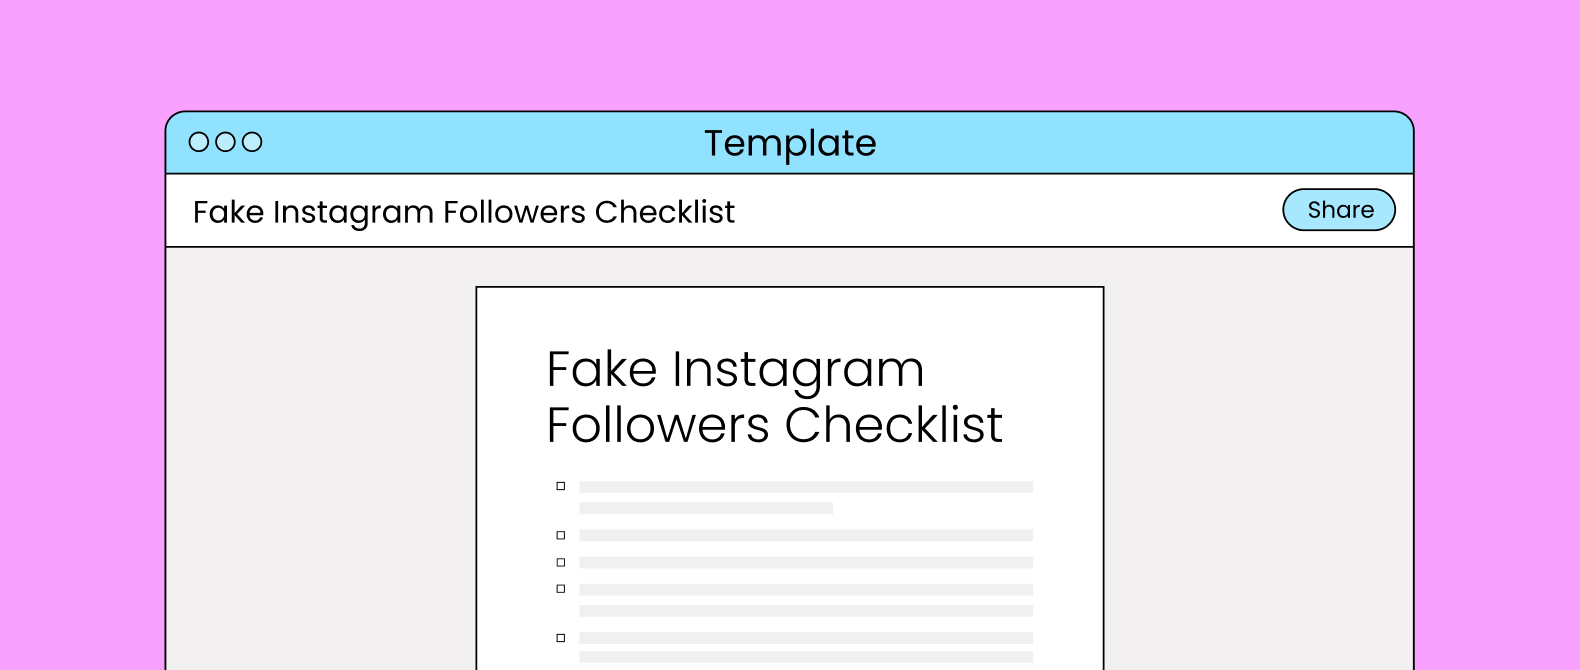 Decorative header for Later’s free fake instagram followers checklist.